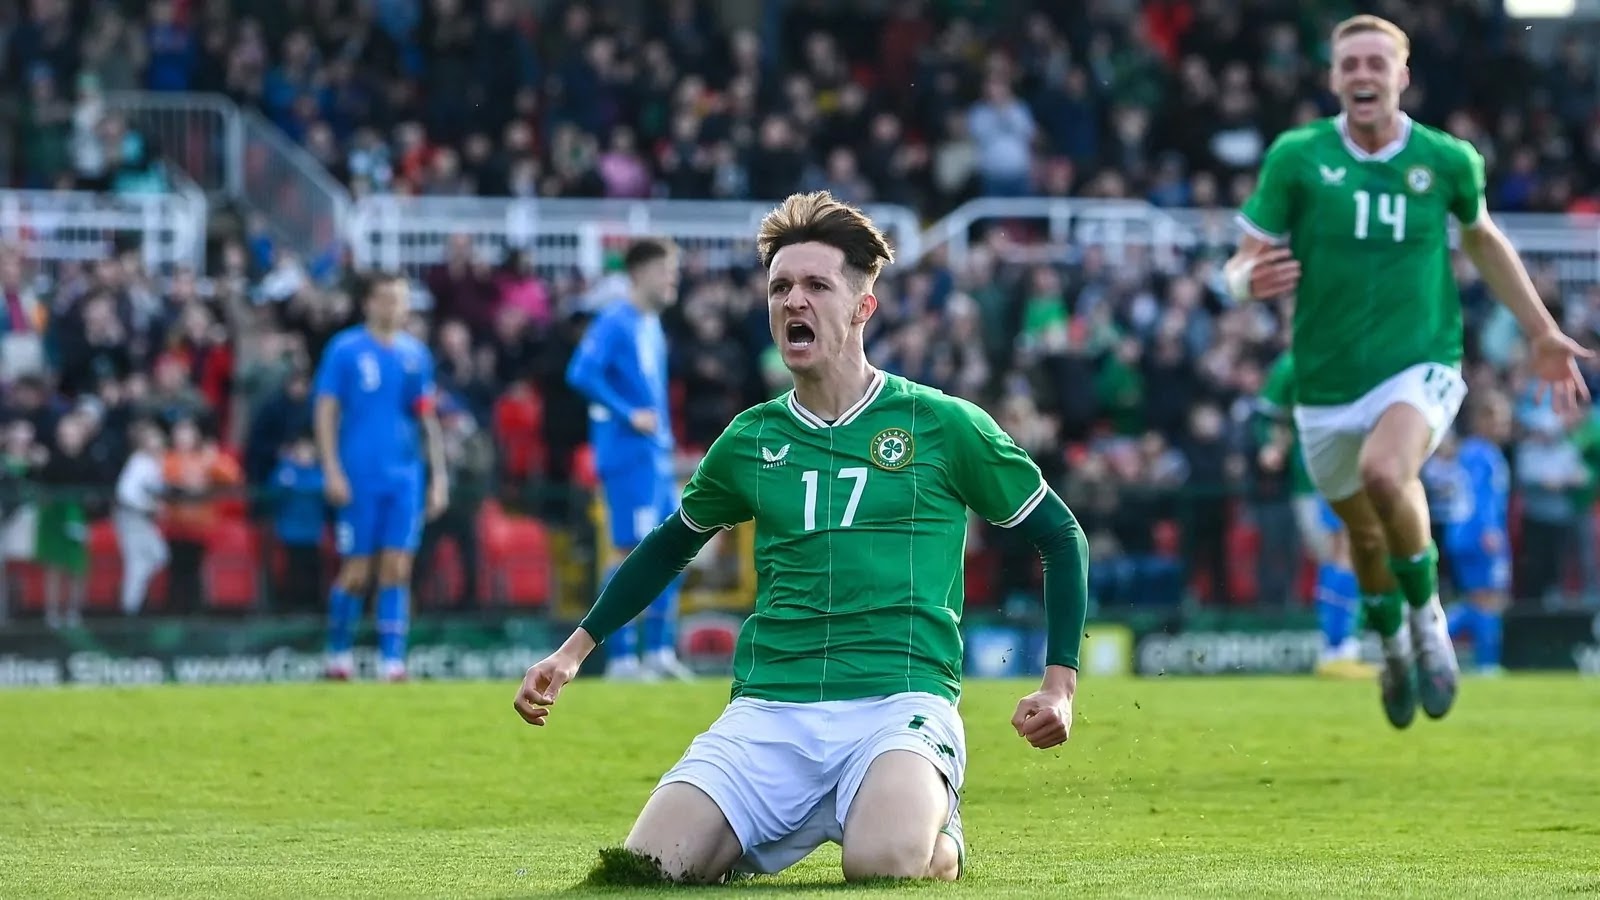 Johnny Kennys heroics secures win for 10-man Ireland U-21s against Iceland